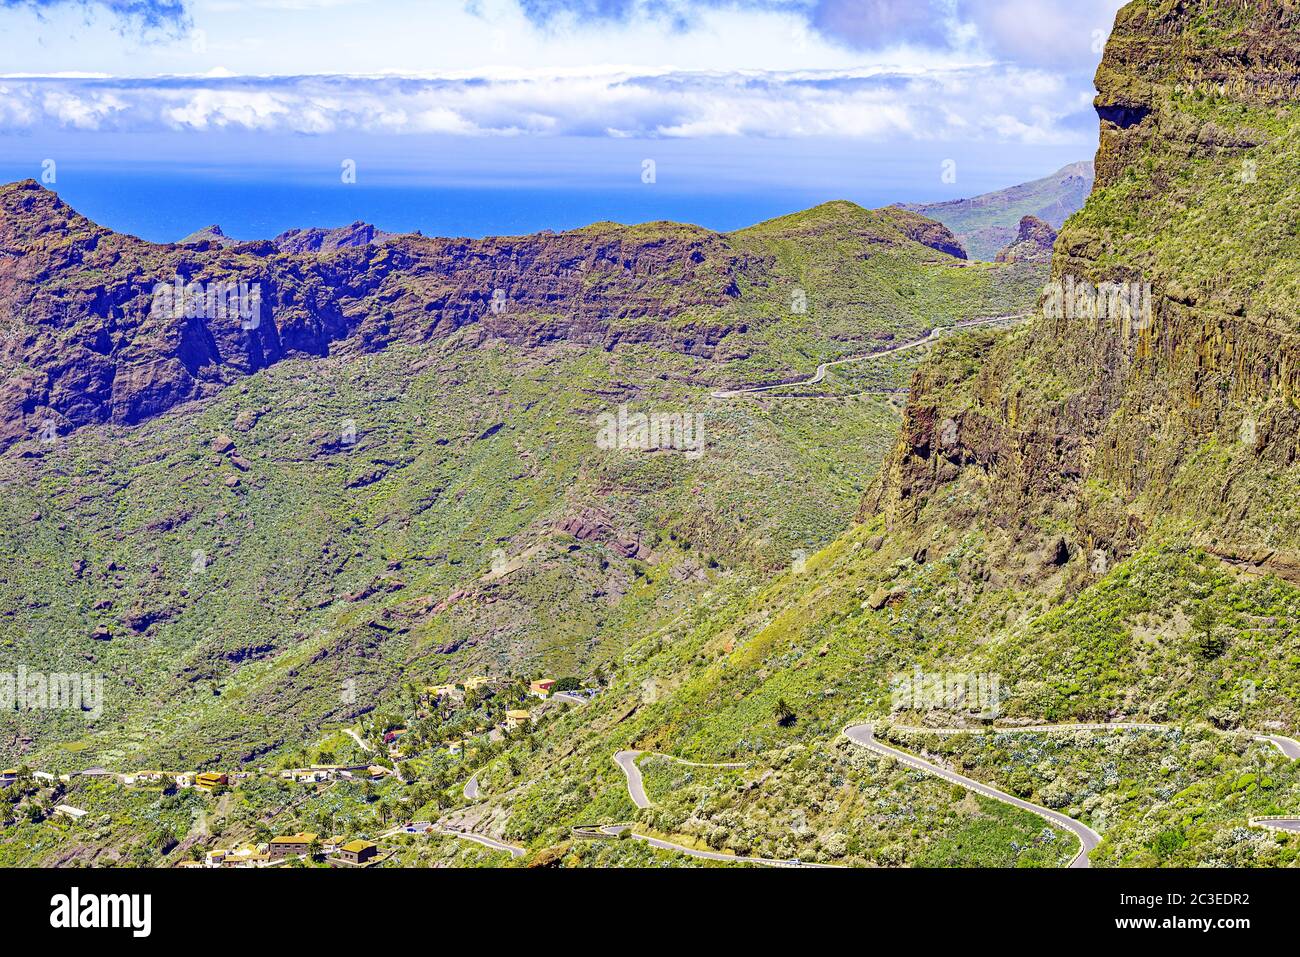 Masca Village and valley in Tenerife Stock Photo